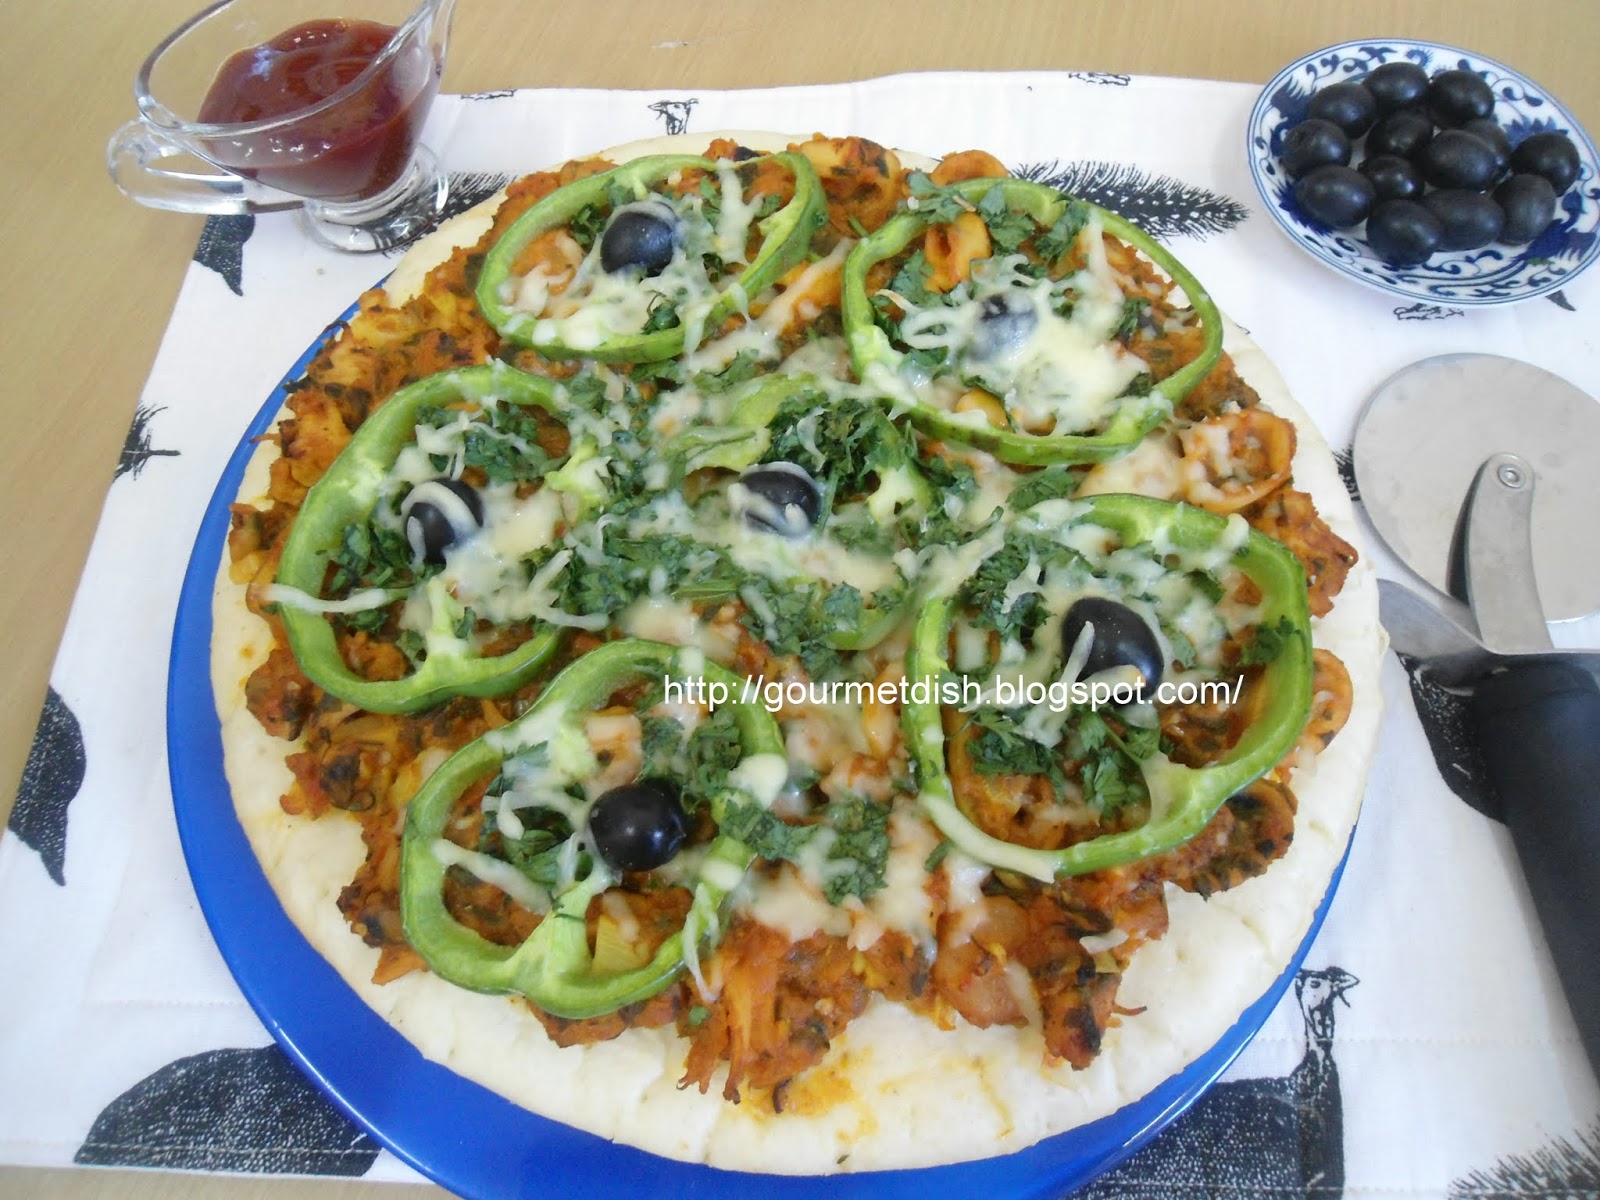  Gourmet Dish The Healthy Pizza with Seafood Gourmet 